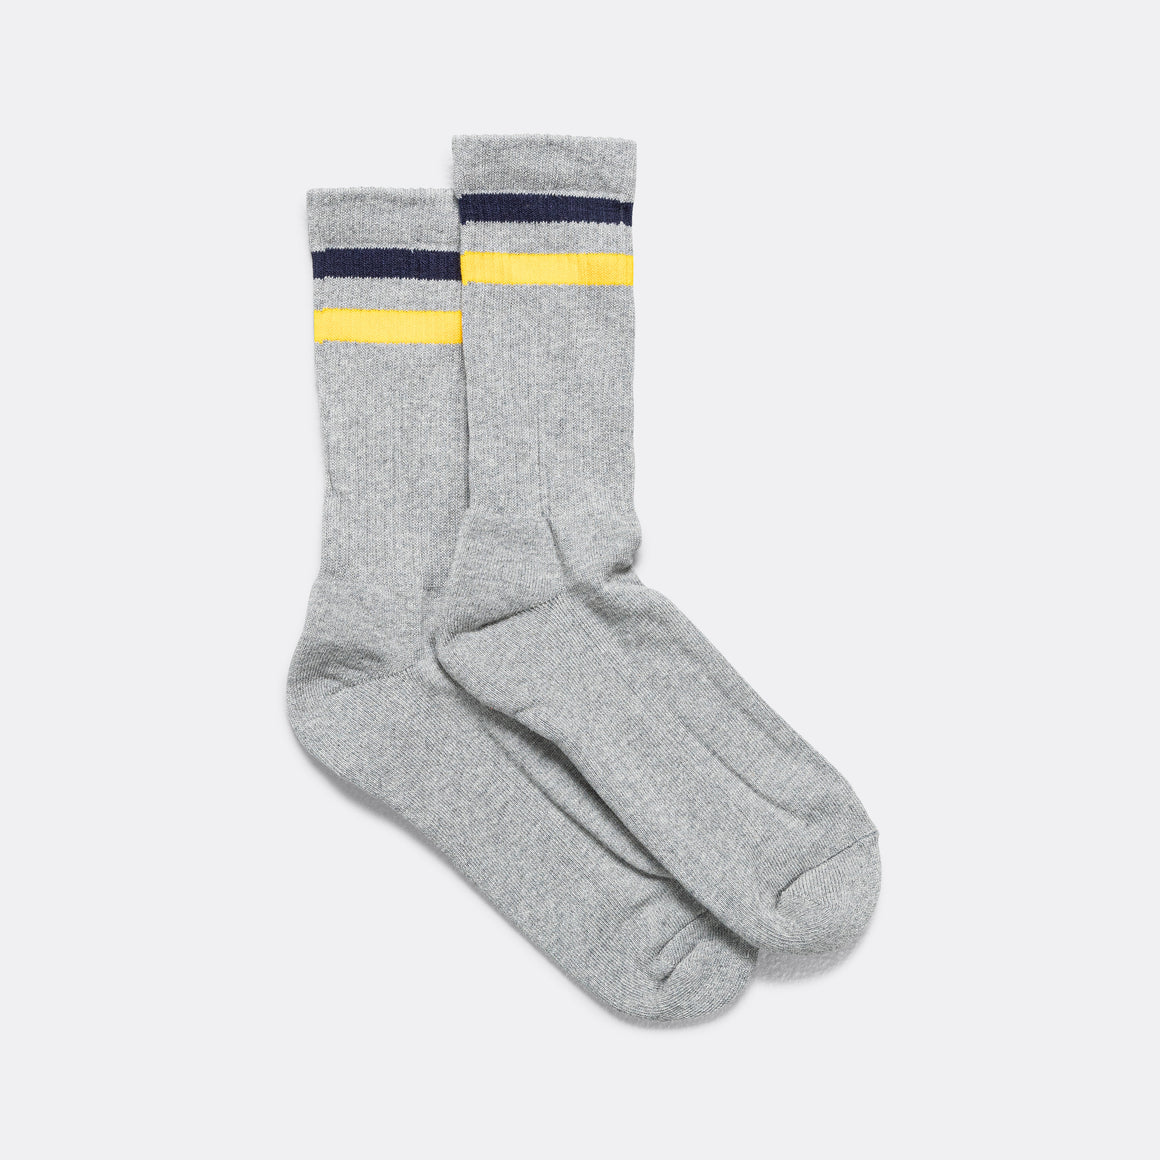 Lite Year - Cotton Cap Crew Socks - Charcoal/Heather Grey - UP THERE